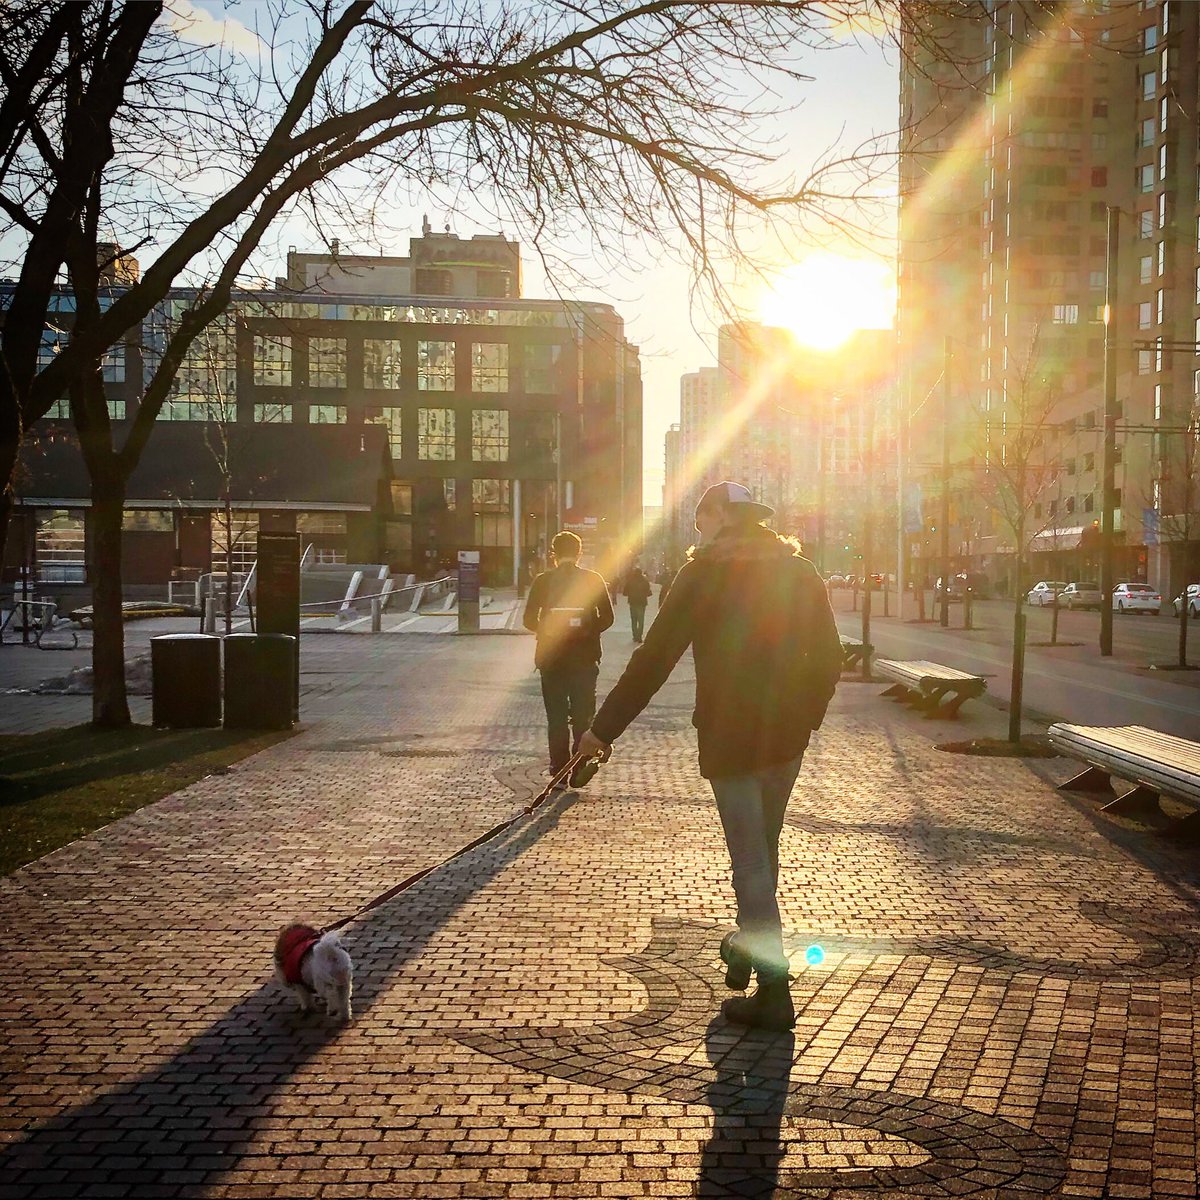 Winter sunset in the city. Spring is slowly fighting its way in ☀️ #puppywalks #puppymom #torontolife